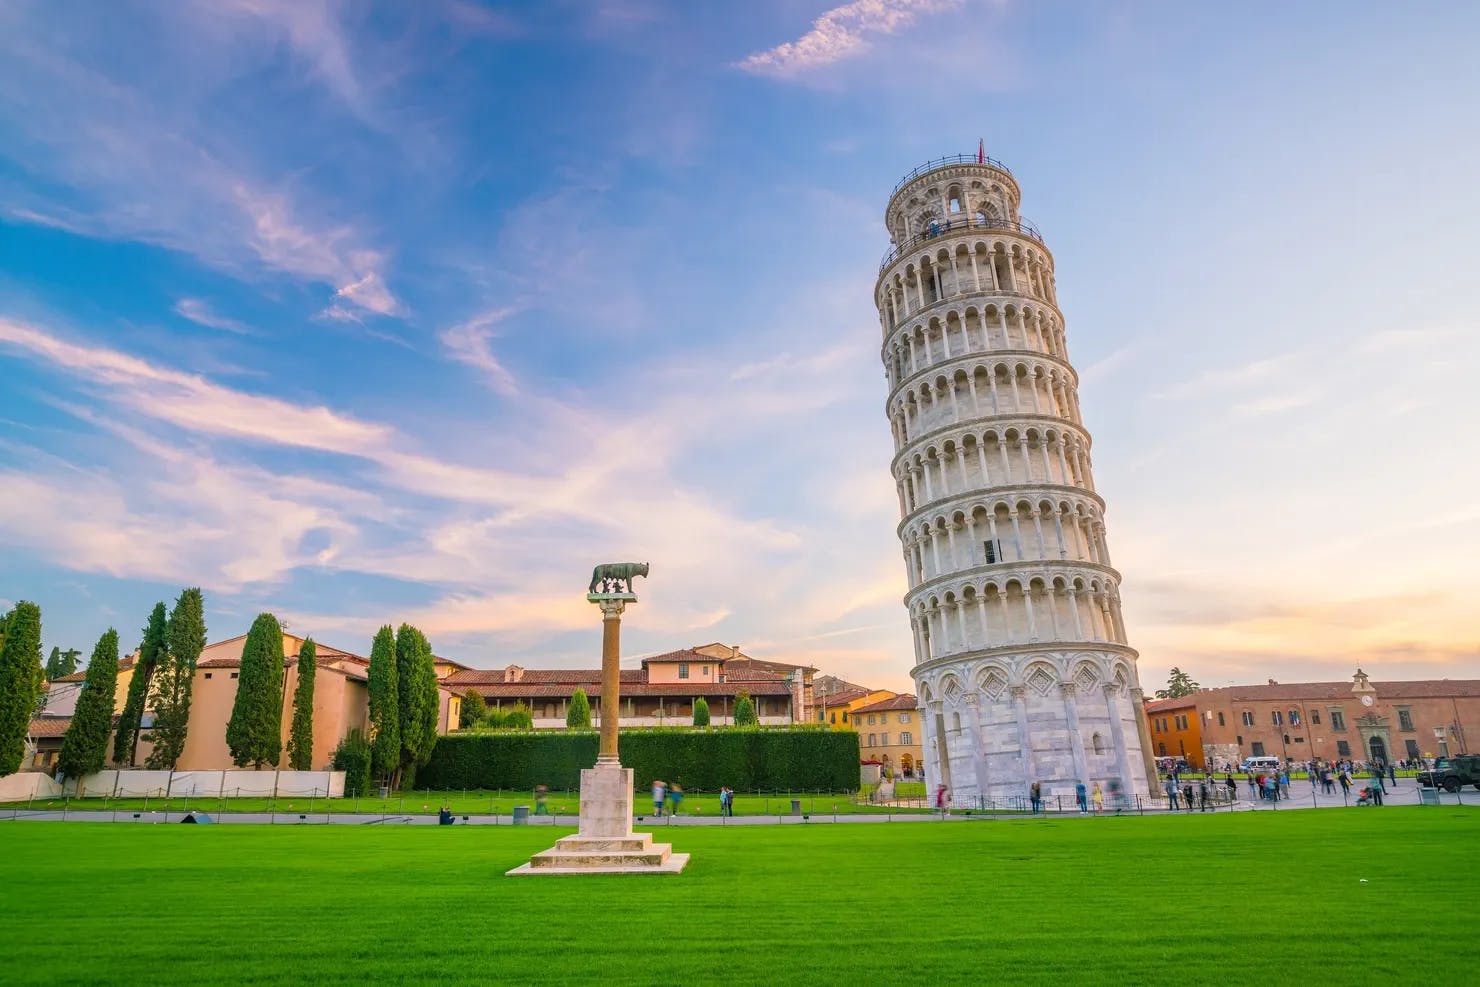 The Leaning Tower of Pisa in Pisa, Italy